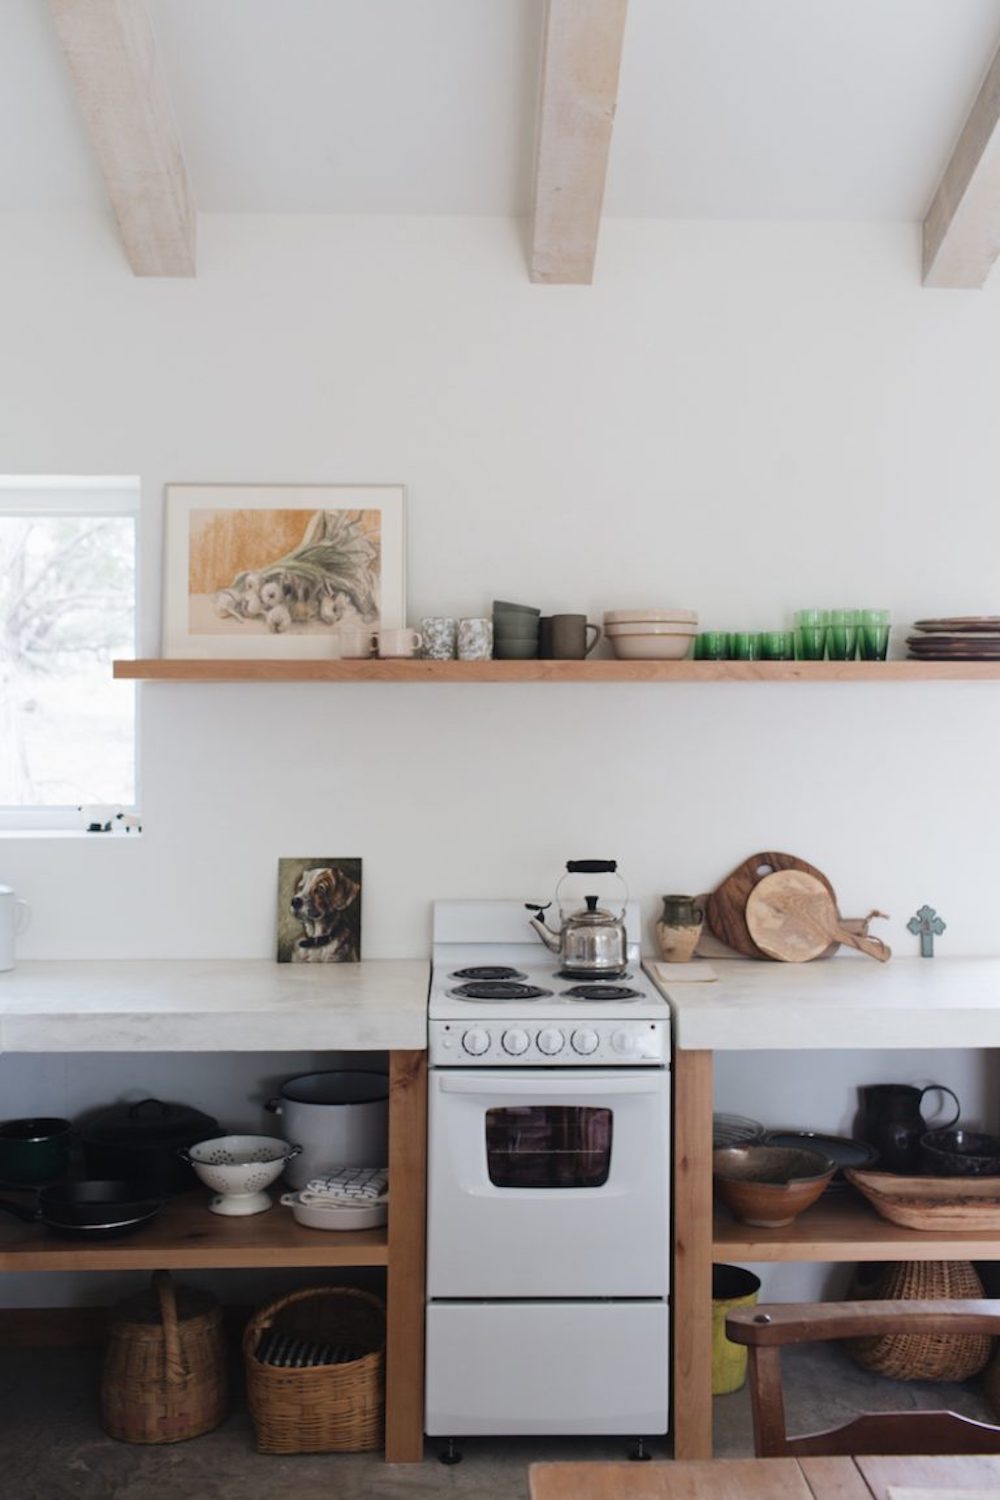 kate zimmerman's country kitchen